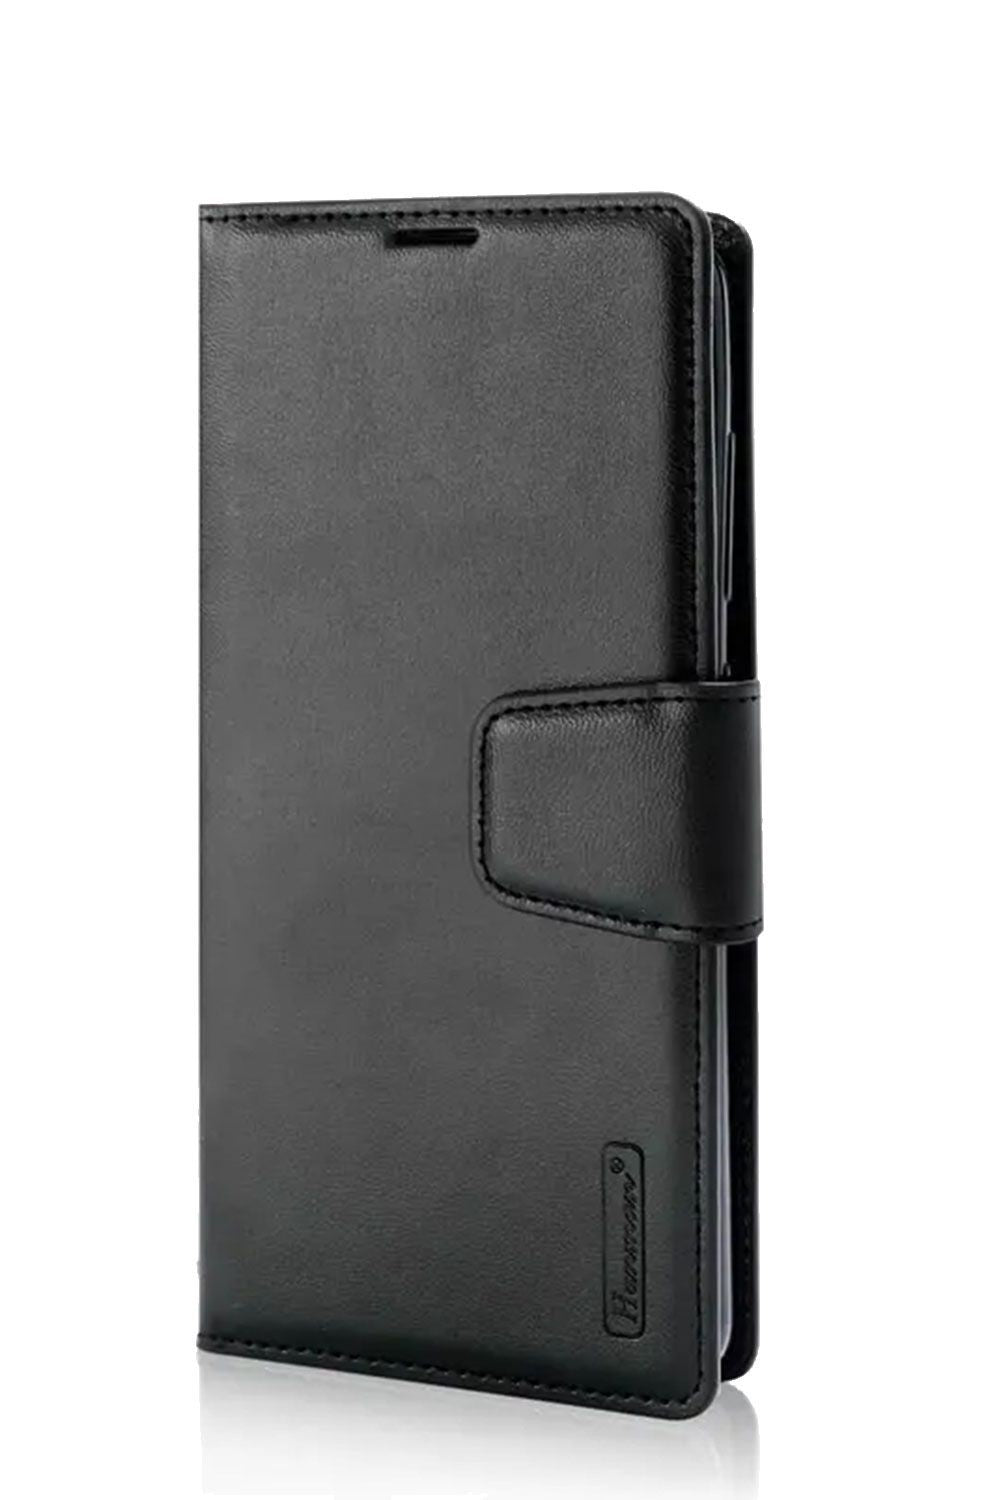 Hanman Samsung Galaxy A05S Premium Leather Wallet Flip Case with Card Slots